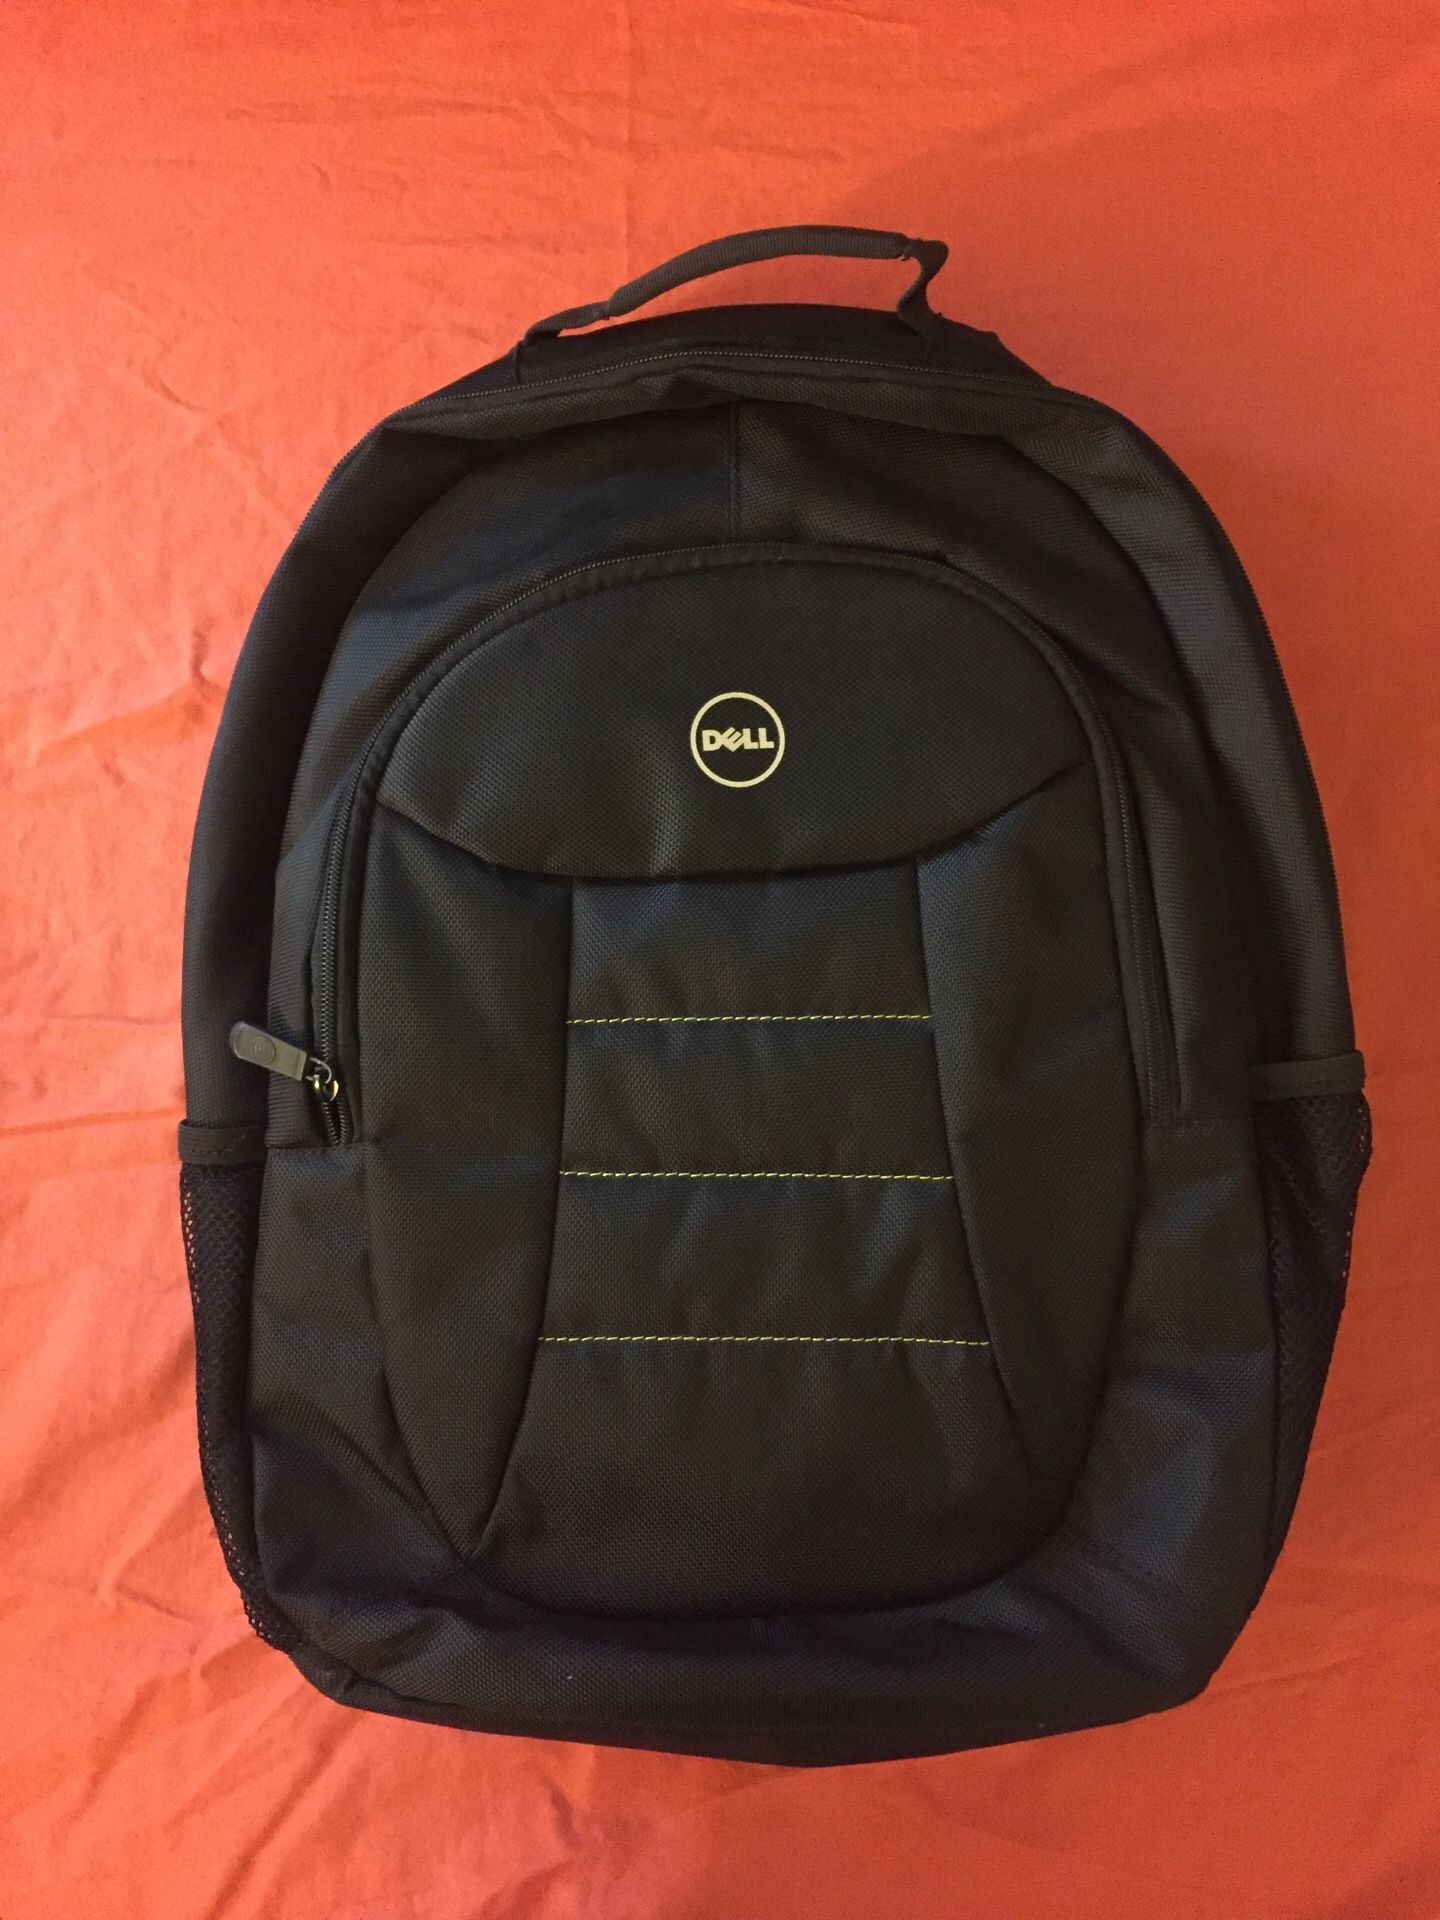 Dell 15inch Laptop Backpack